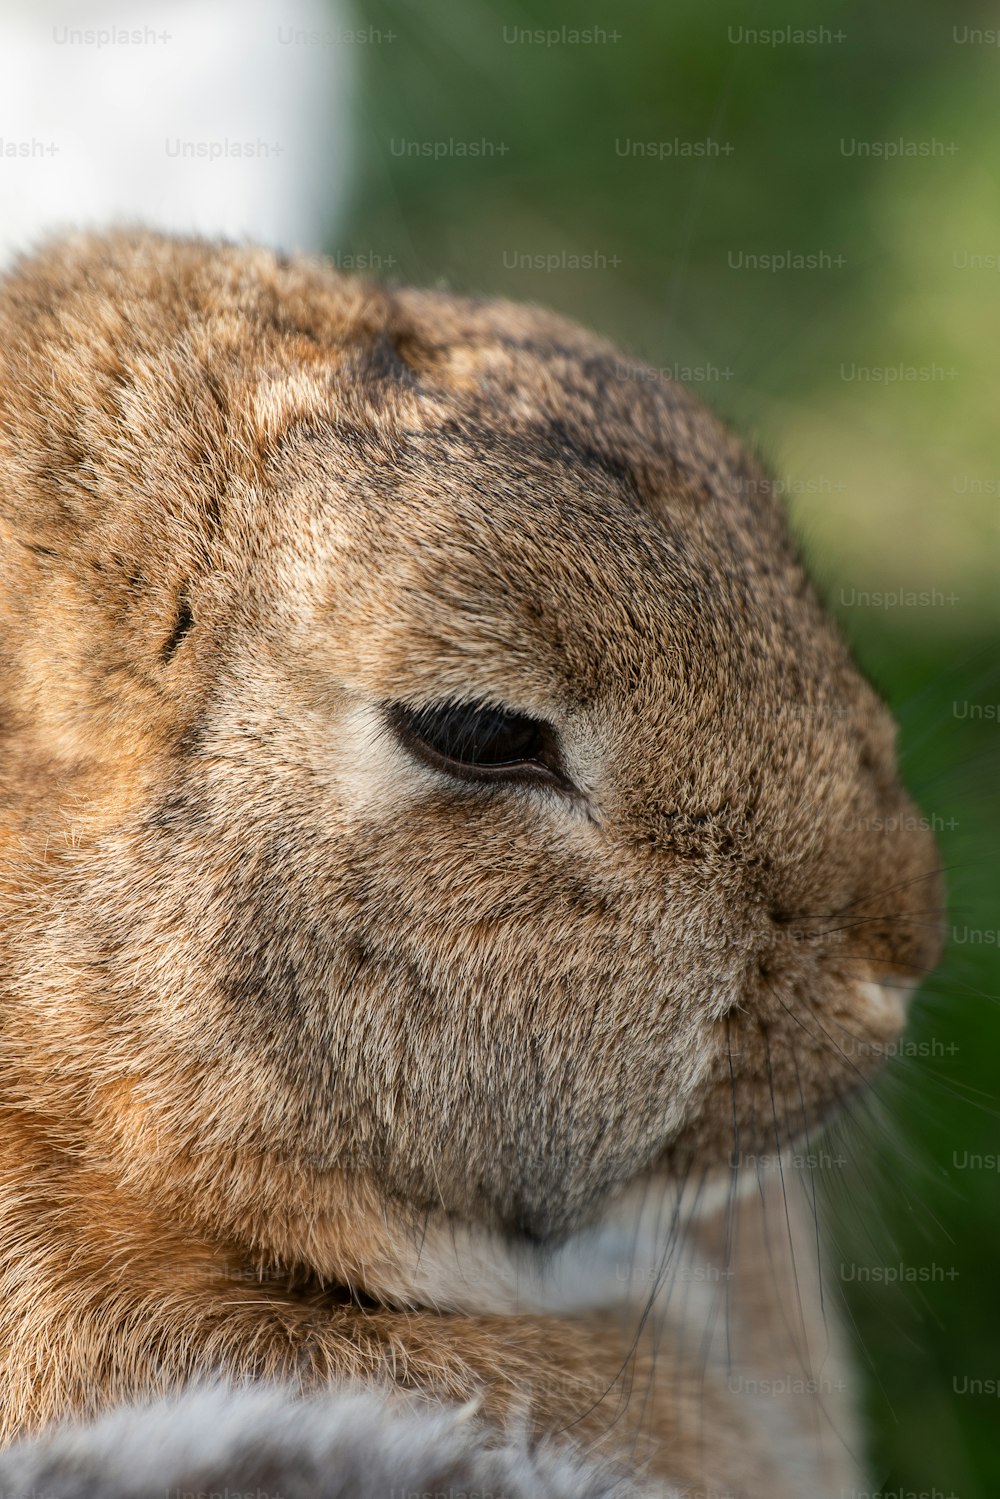 a close up of a rabbit's face with a blurry background